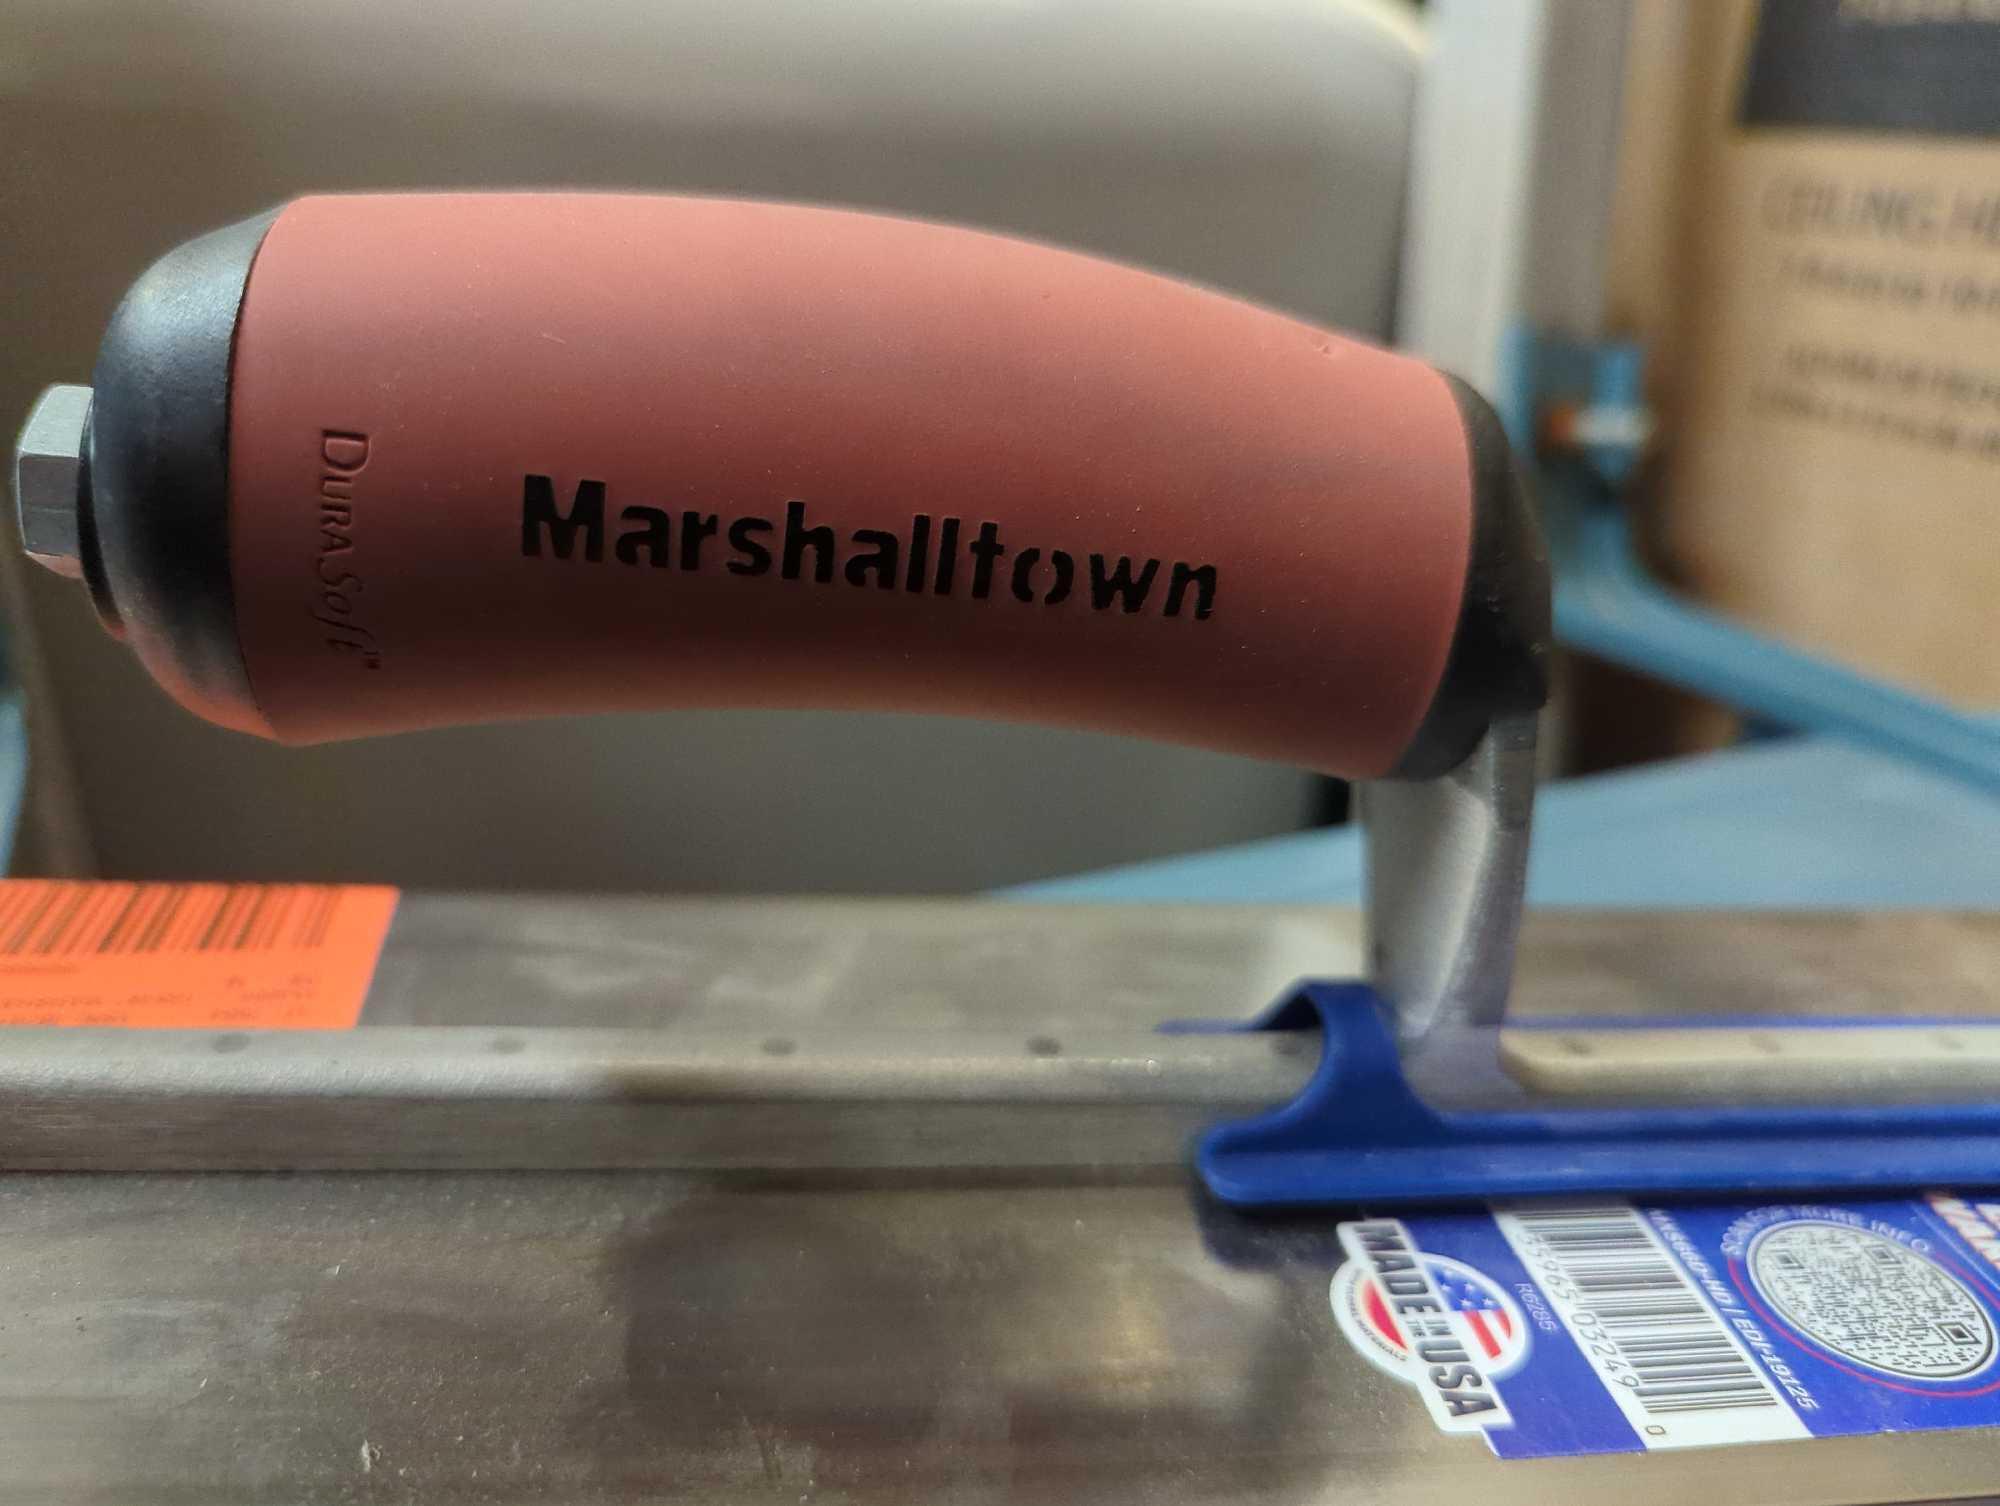 MARSHALLTOWN 16 in. x 4 in. Finishing Trowel - Curved Durasoft Handle, Appears to be New Needs